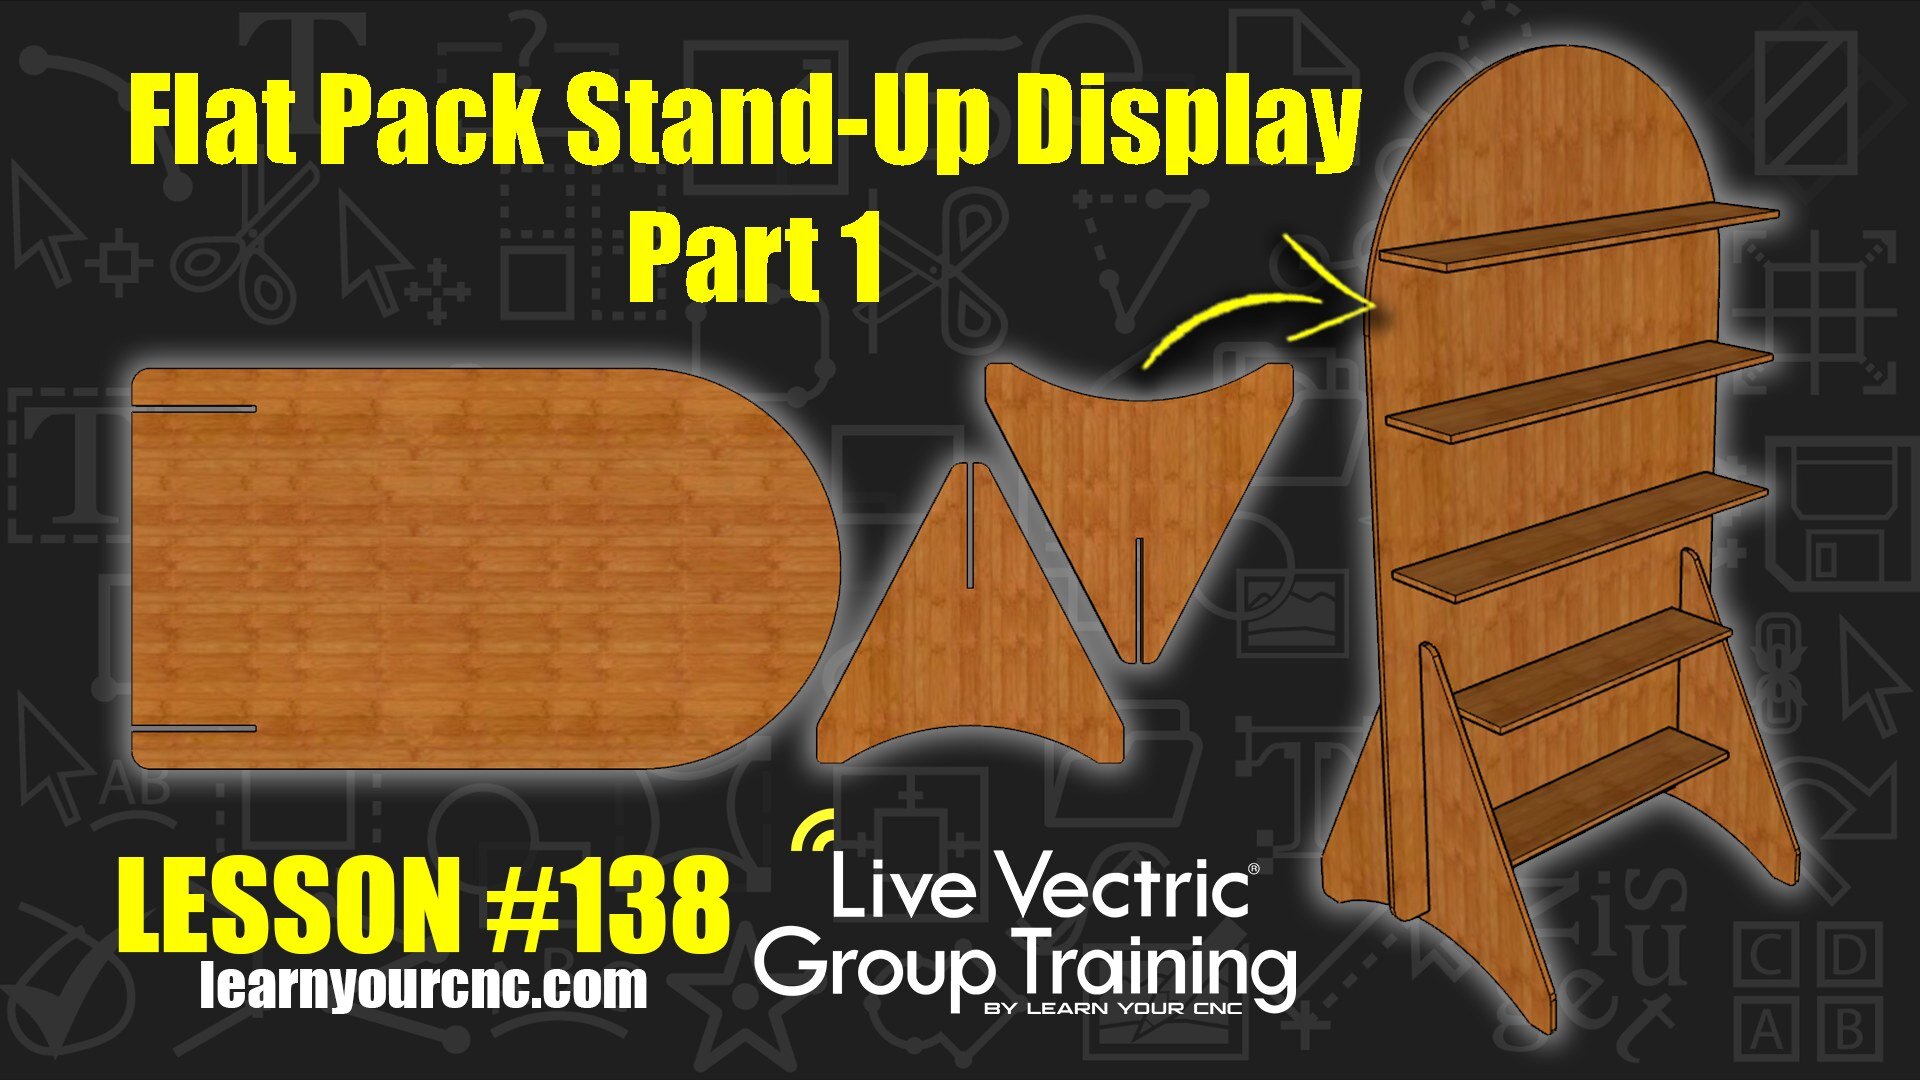 Thank you to everyone that showed up to our live Vectric training #138! In this training, we learned part 1 of designing a stand-up &quot;flat pack&quot; display shelf unit that can be used in a vendor event or a wide variety of other uses. As always